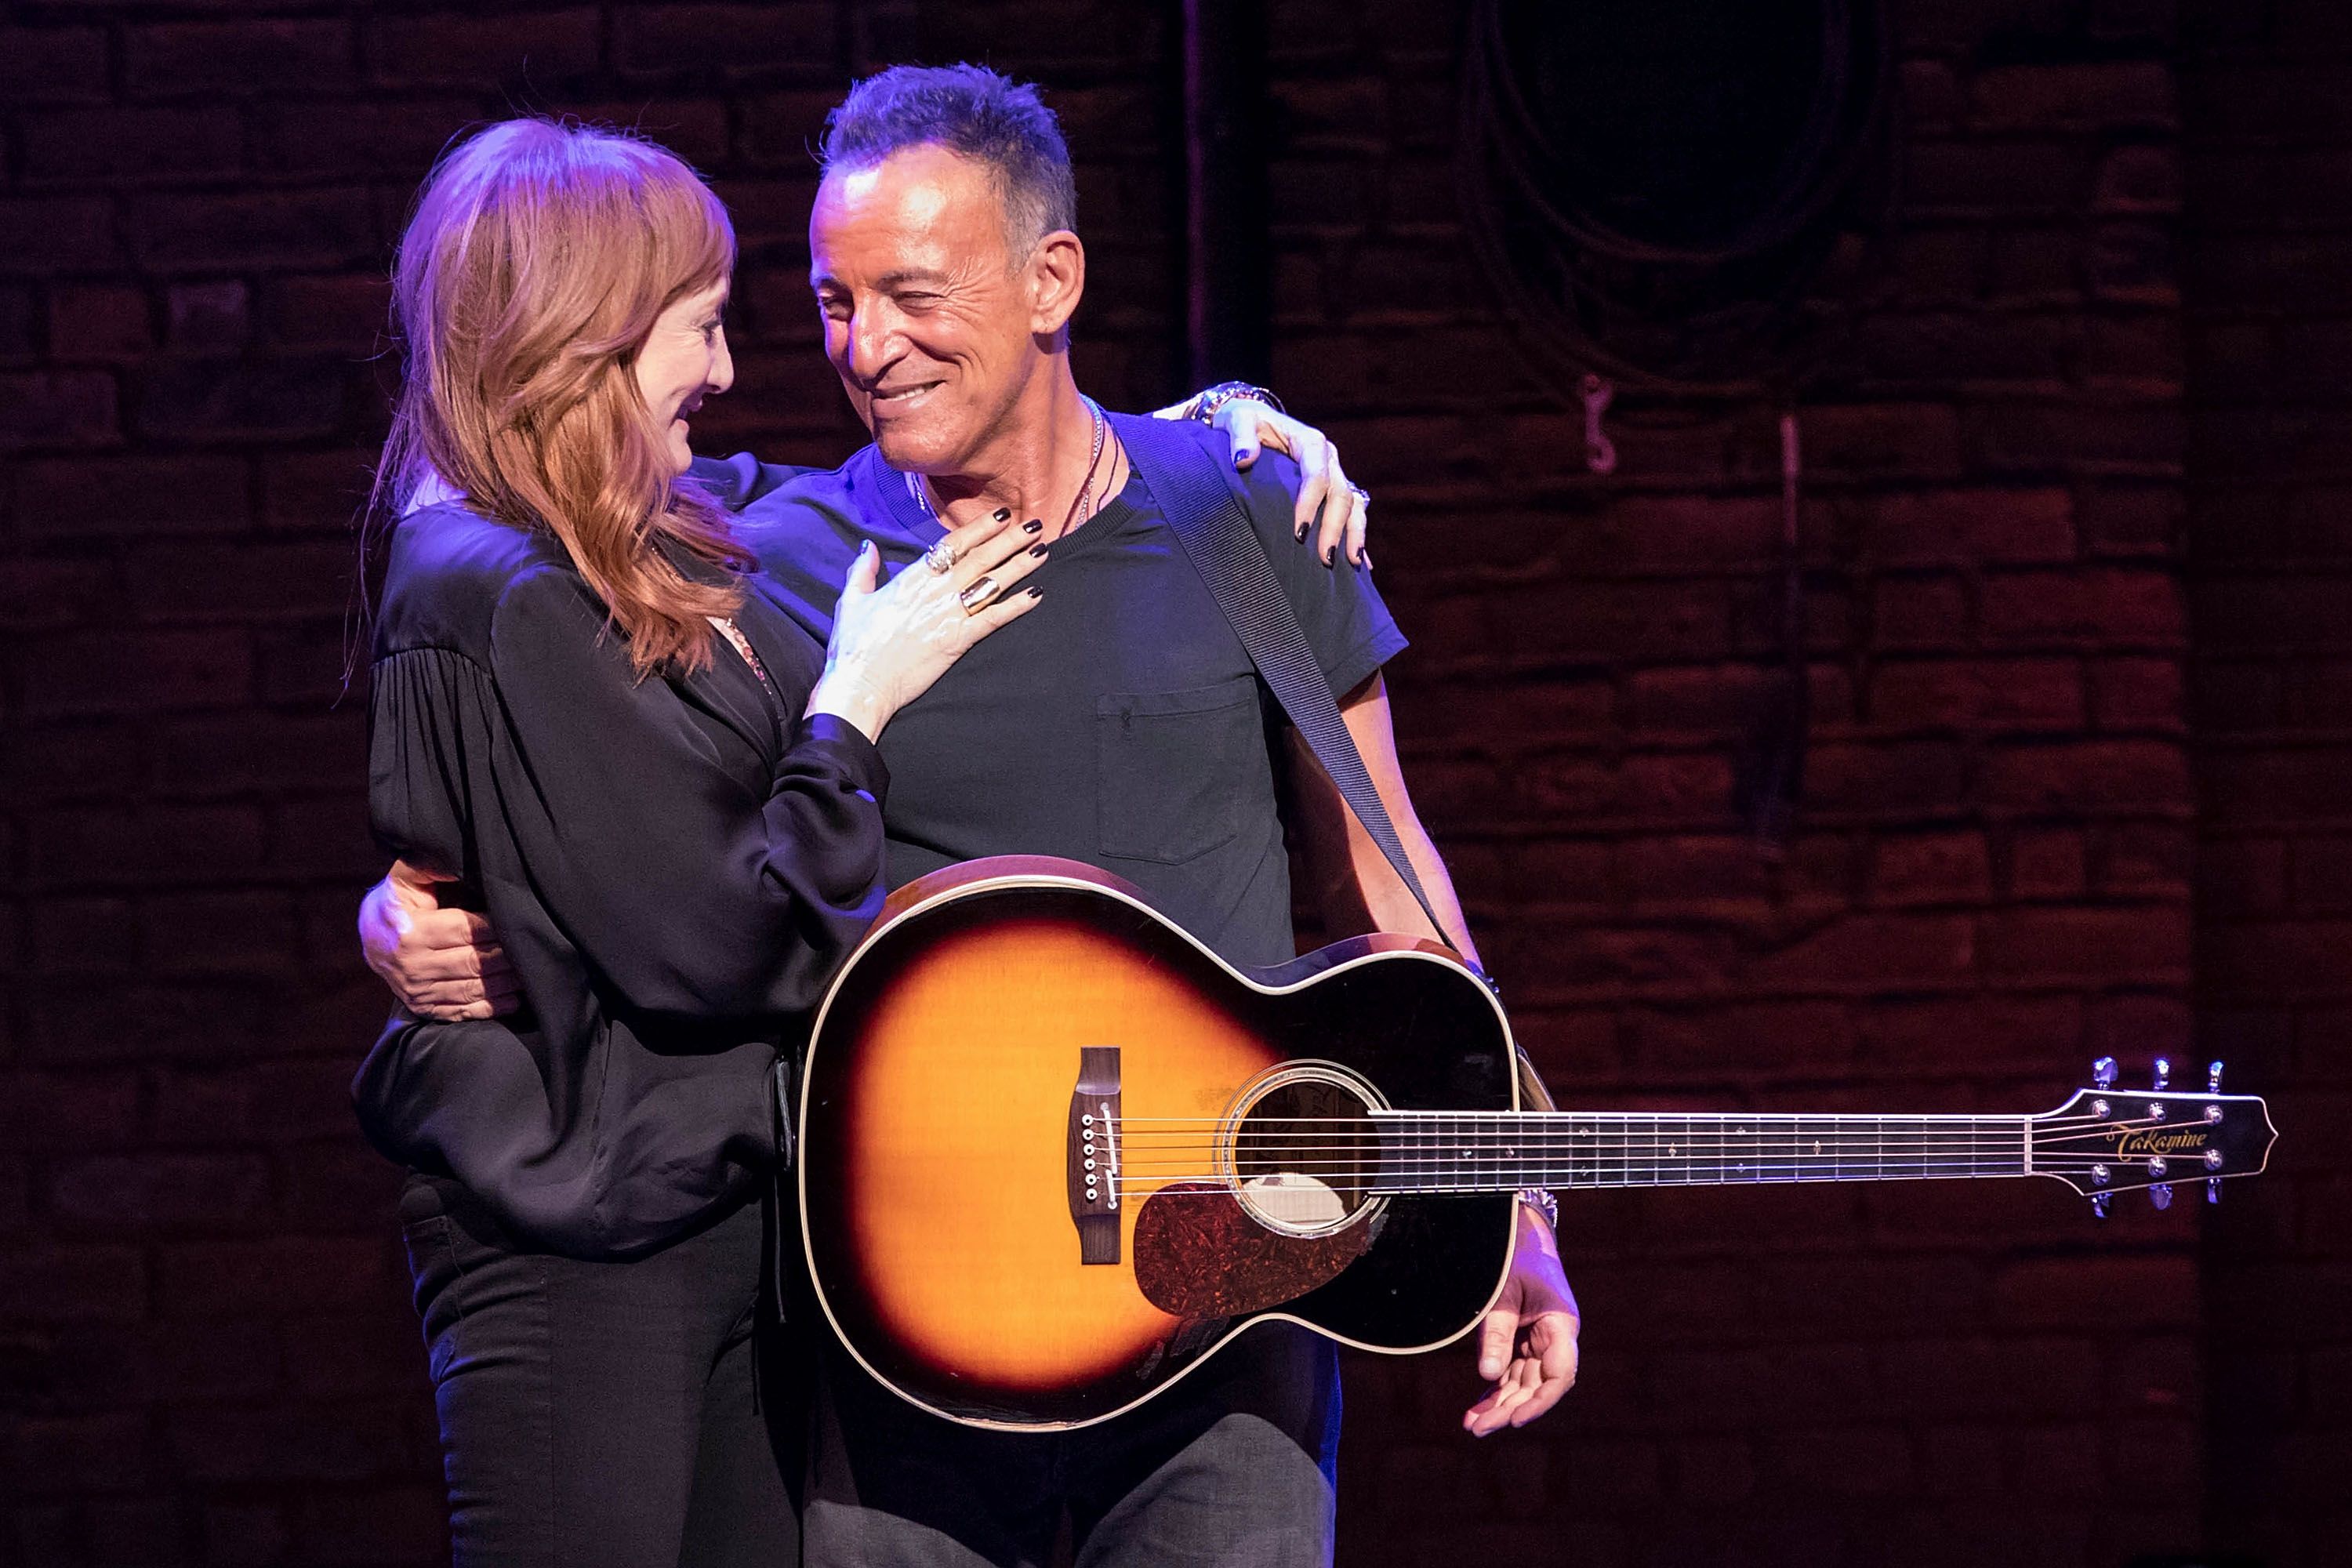 Patti Scialfa with her husband Bruce Springsteen posing with guitar